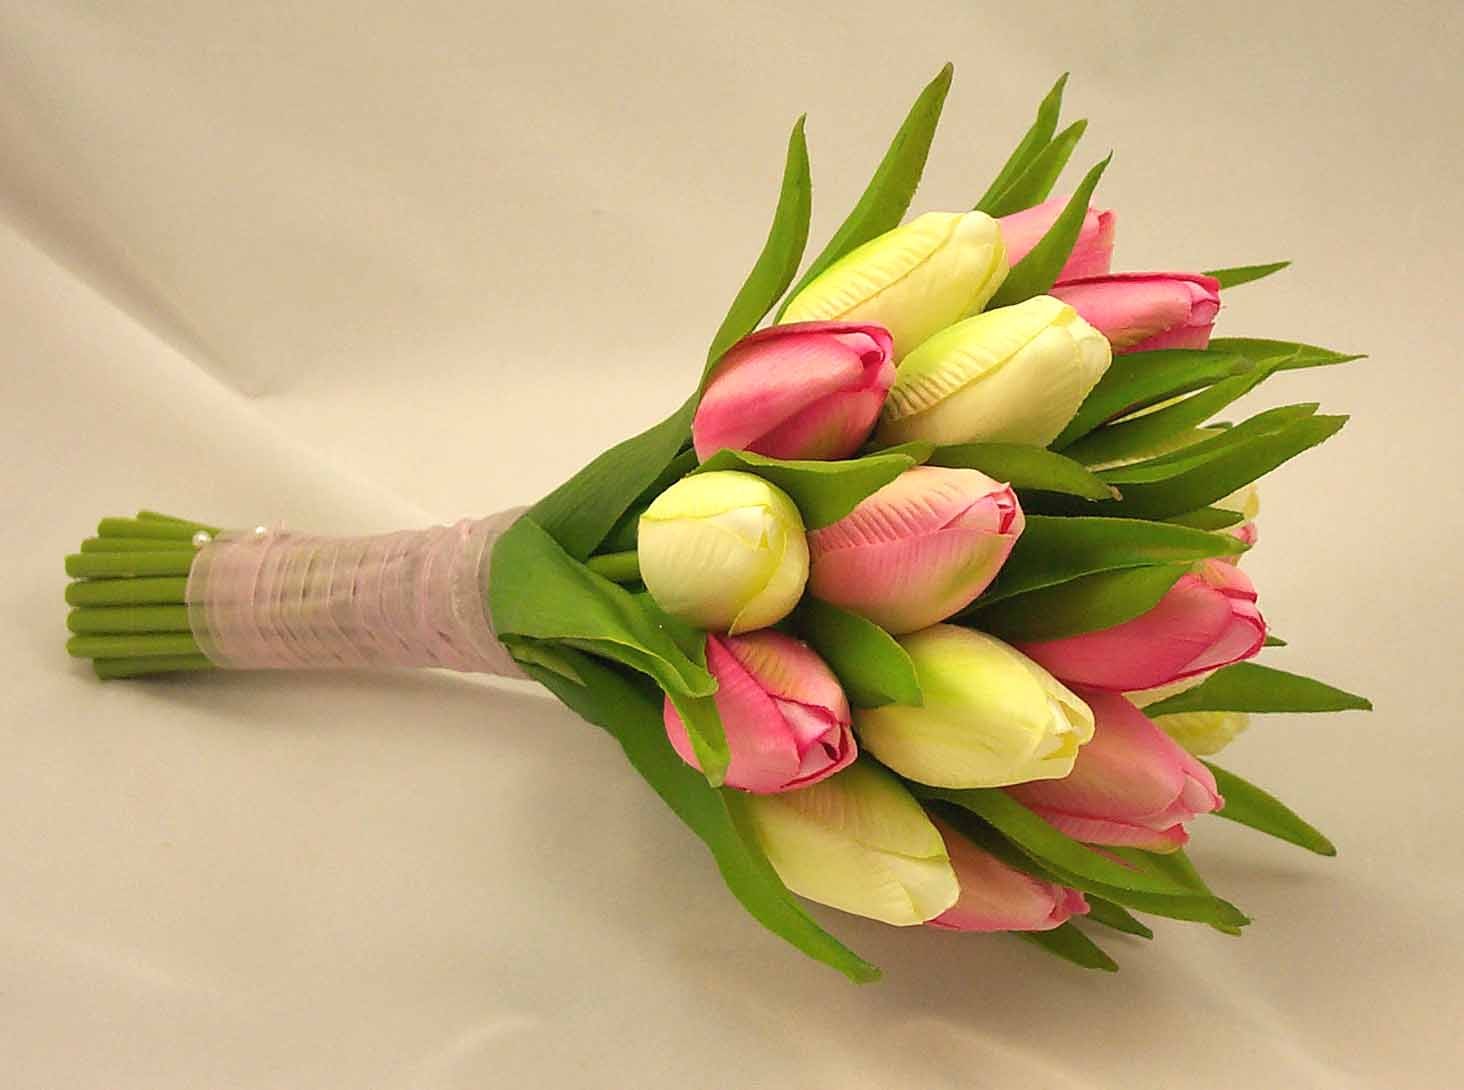 Tulips Budget Considerations For Wedding Flowers